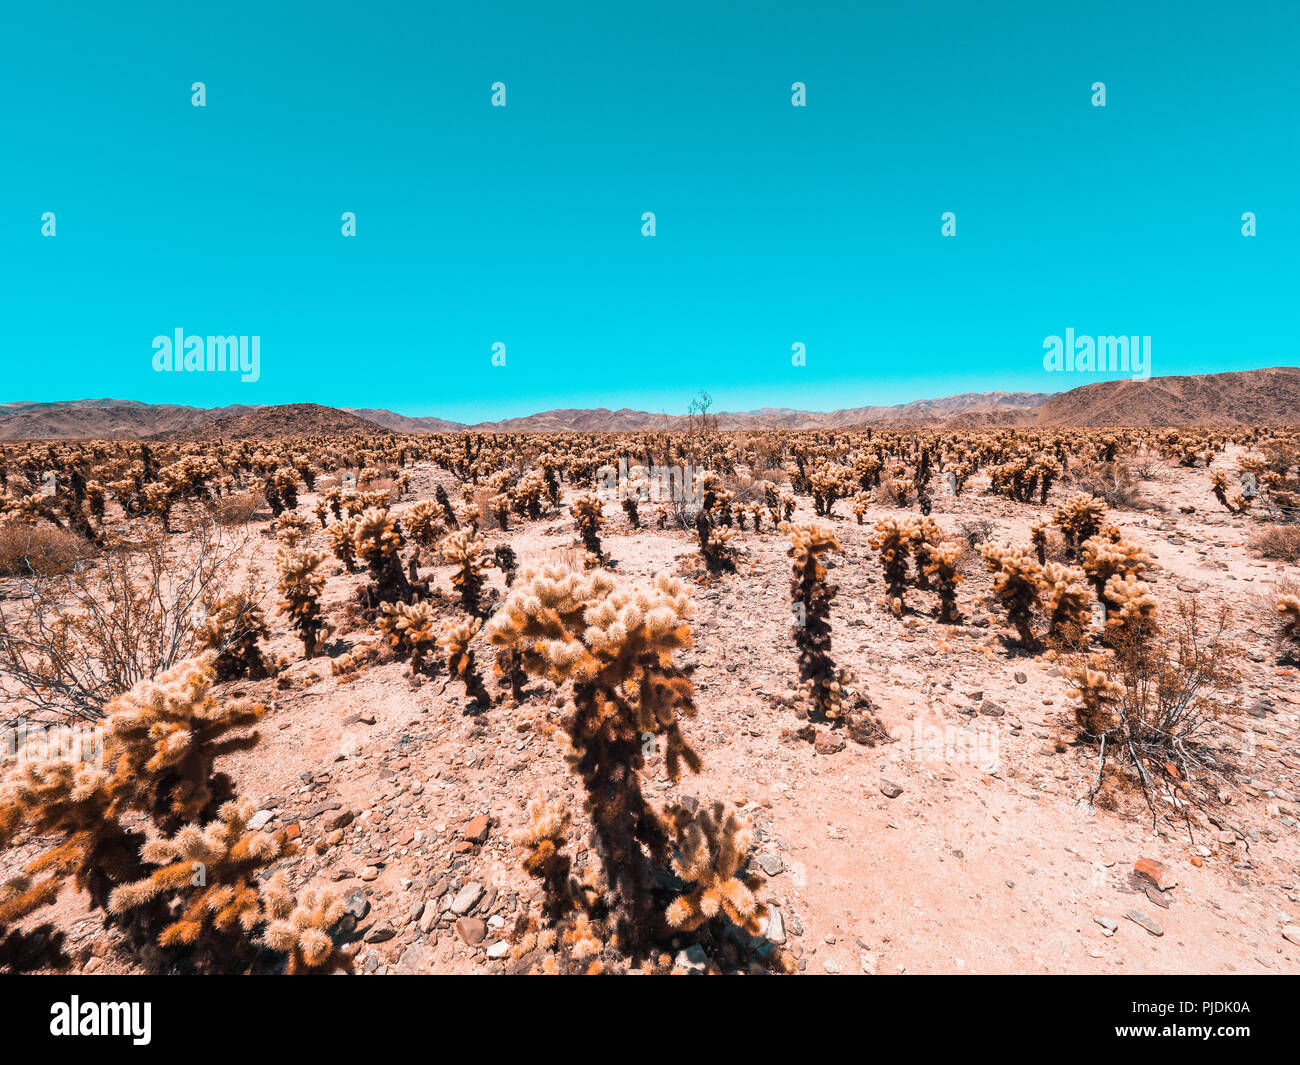 A warm field of orange cactus on the top of a mountain Stock Photo